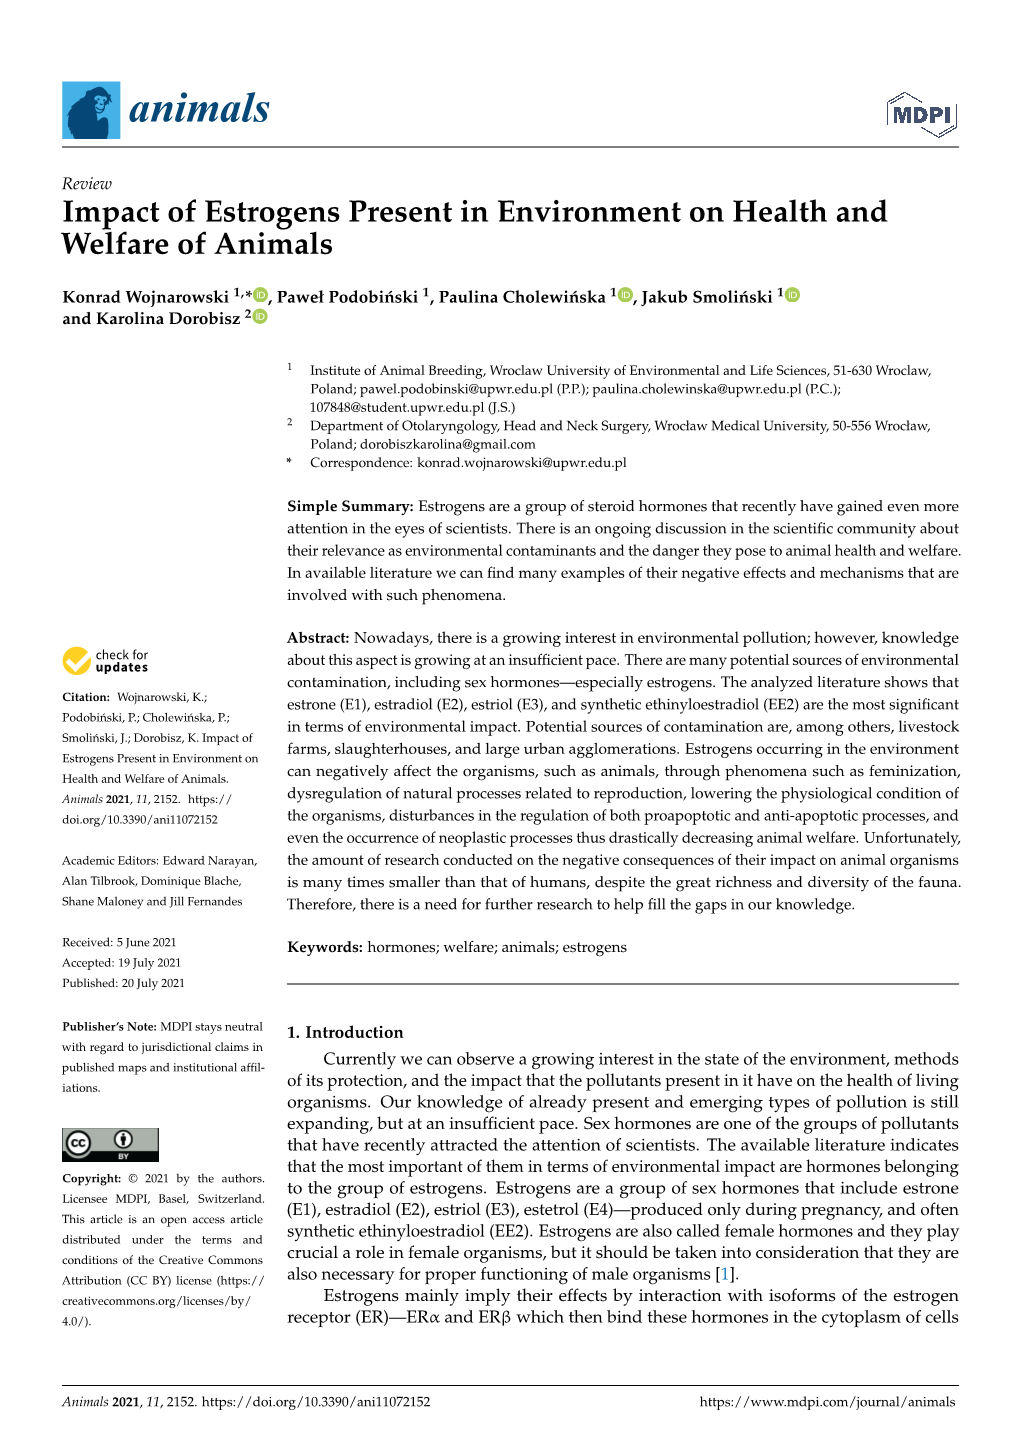 Impact of Estrogens Present in Environment on Health and Welfare of Animals